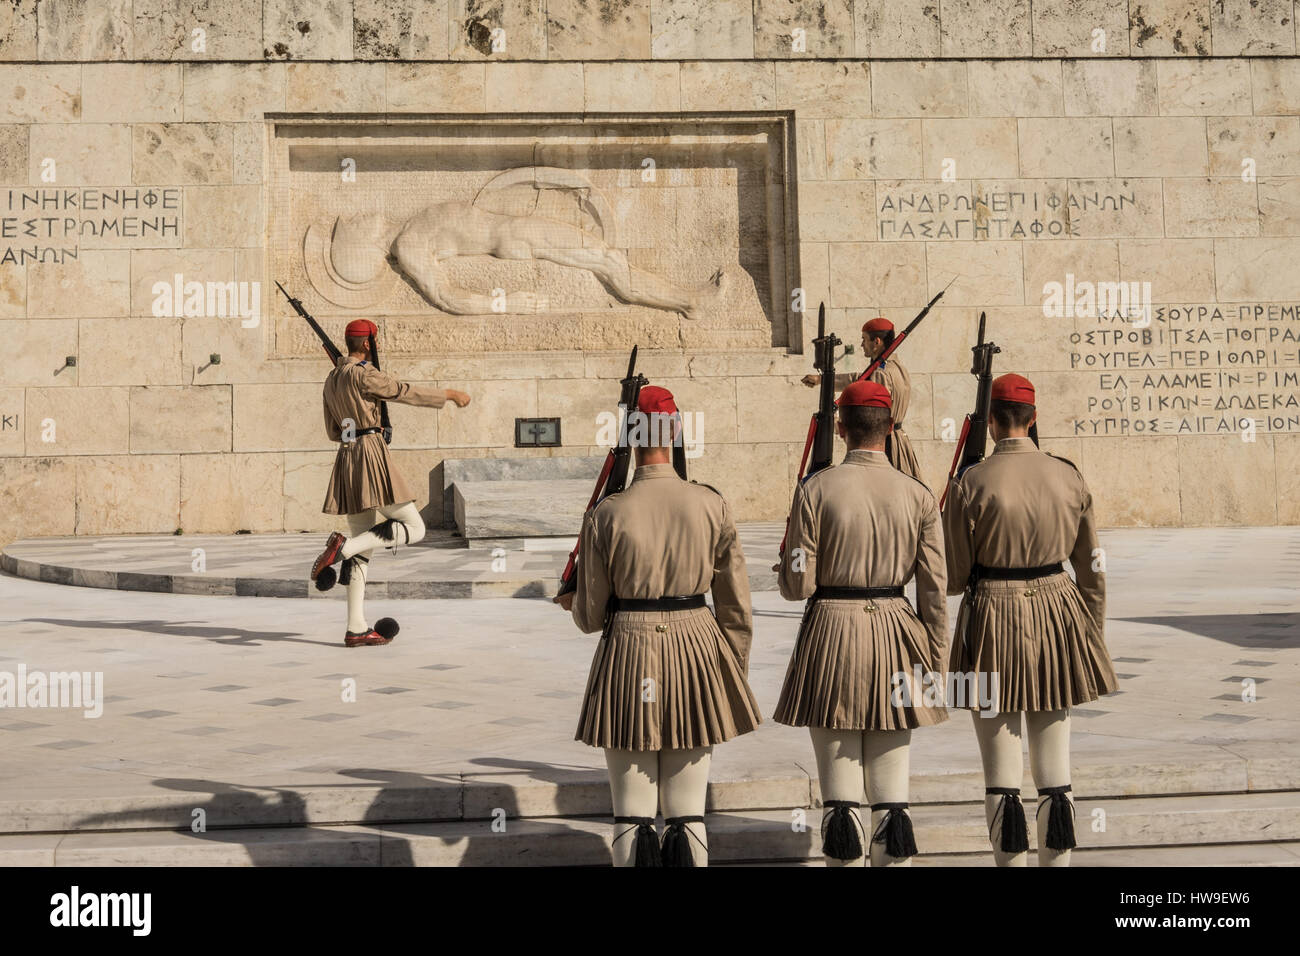 Evzones (Greek presidential guards) in Athens, Greece at the tomb of the unknown soldier. Stock Photo